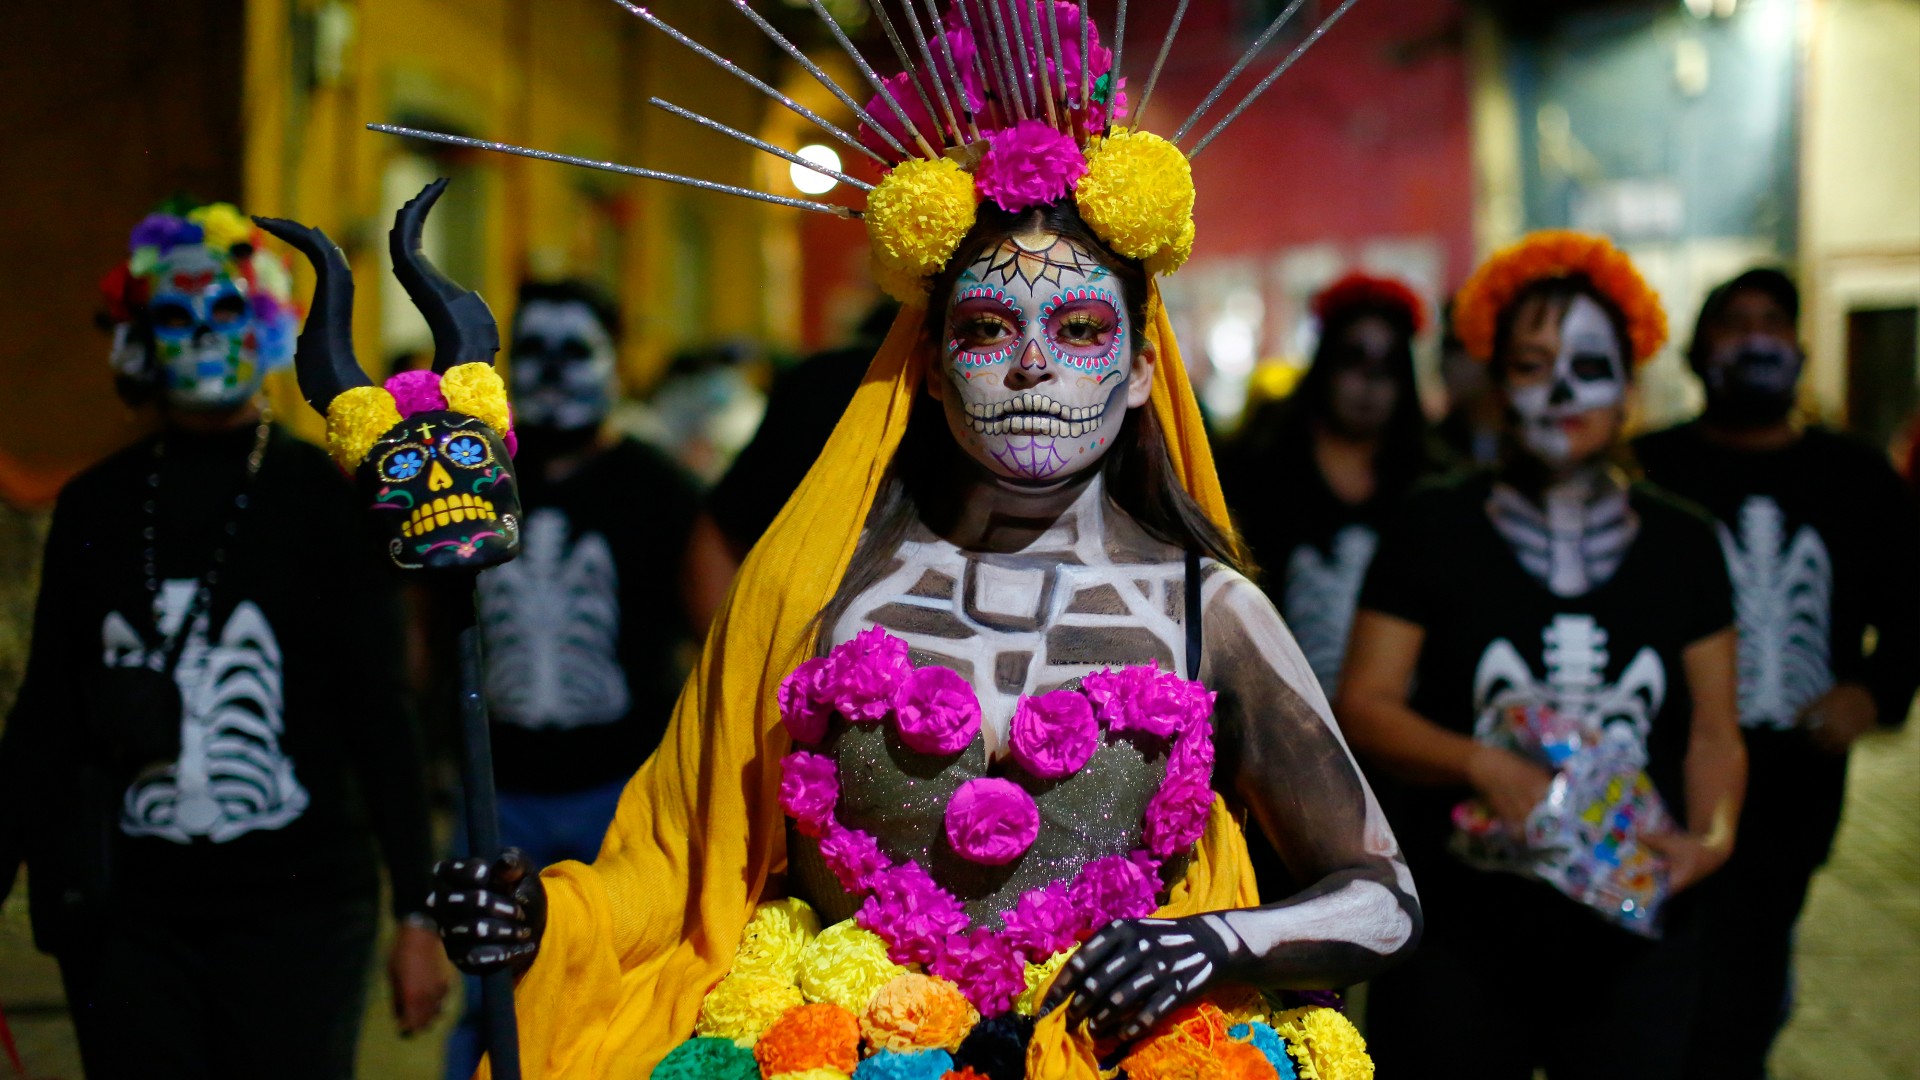 Mexican culture: Customs and traditions